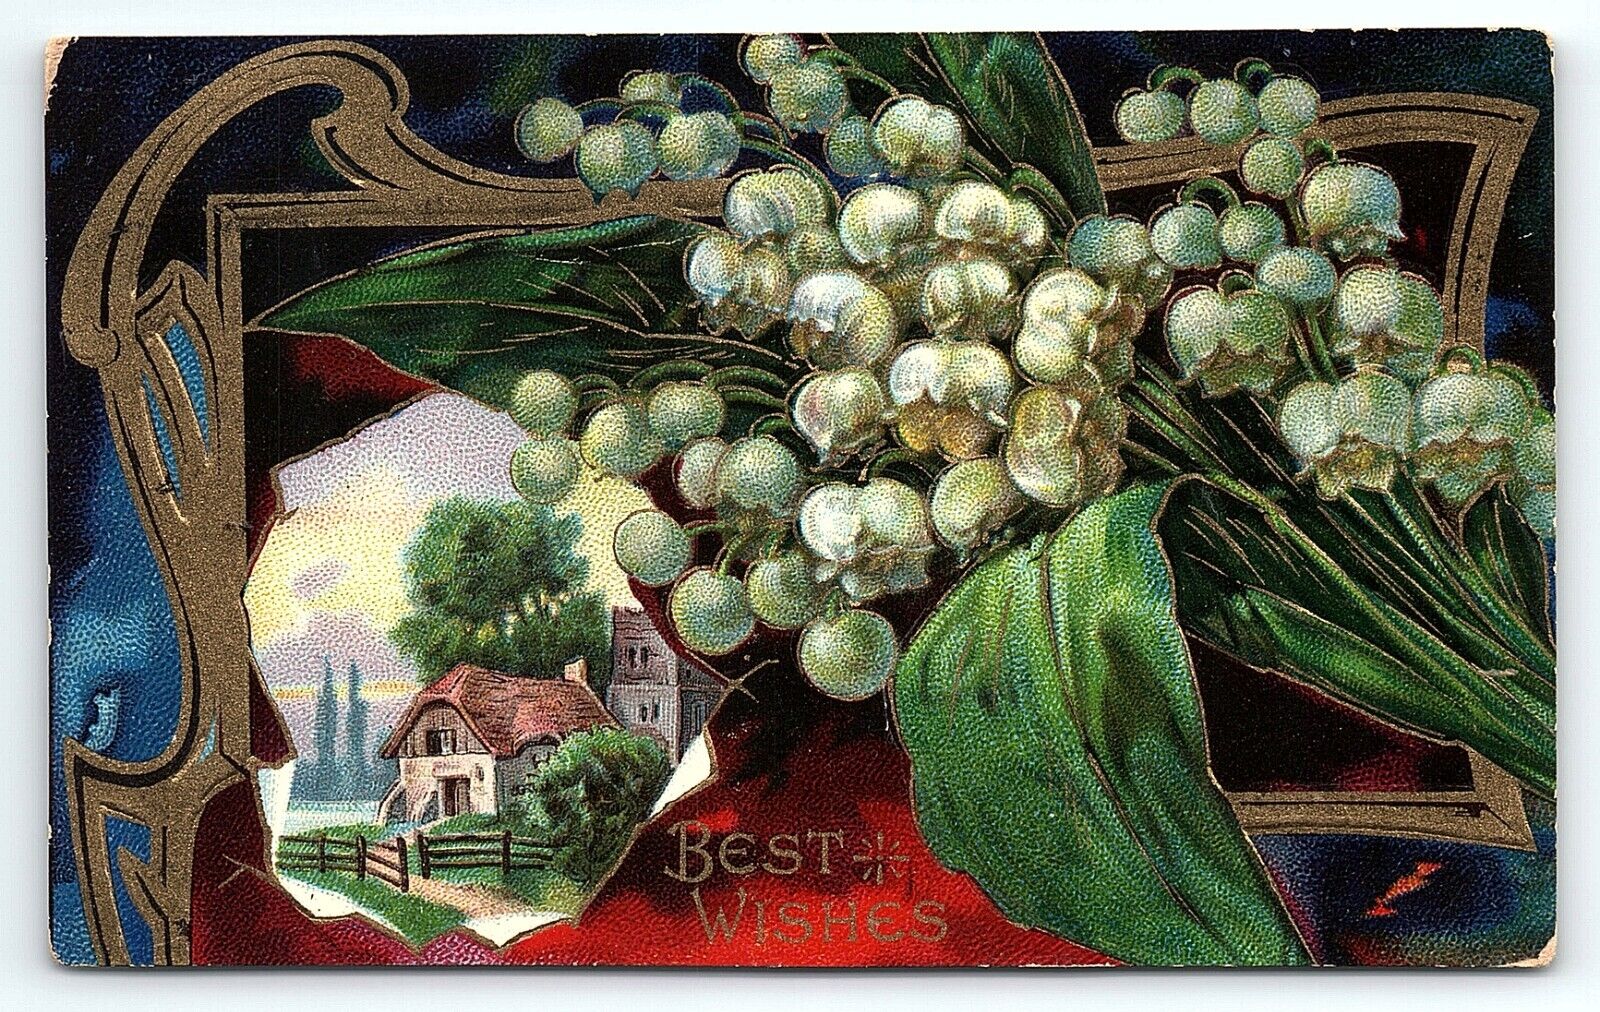 1910 BEST WISHES COTTAGE FLORAL BOQUET EMBOSSED GILDED OHIO POSTCARD P2512